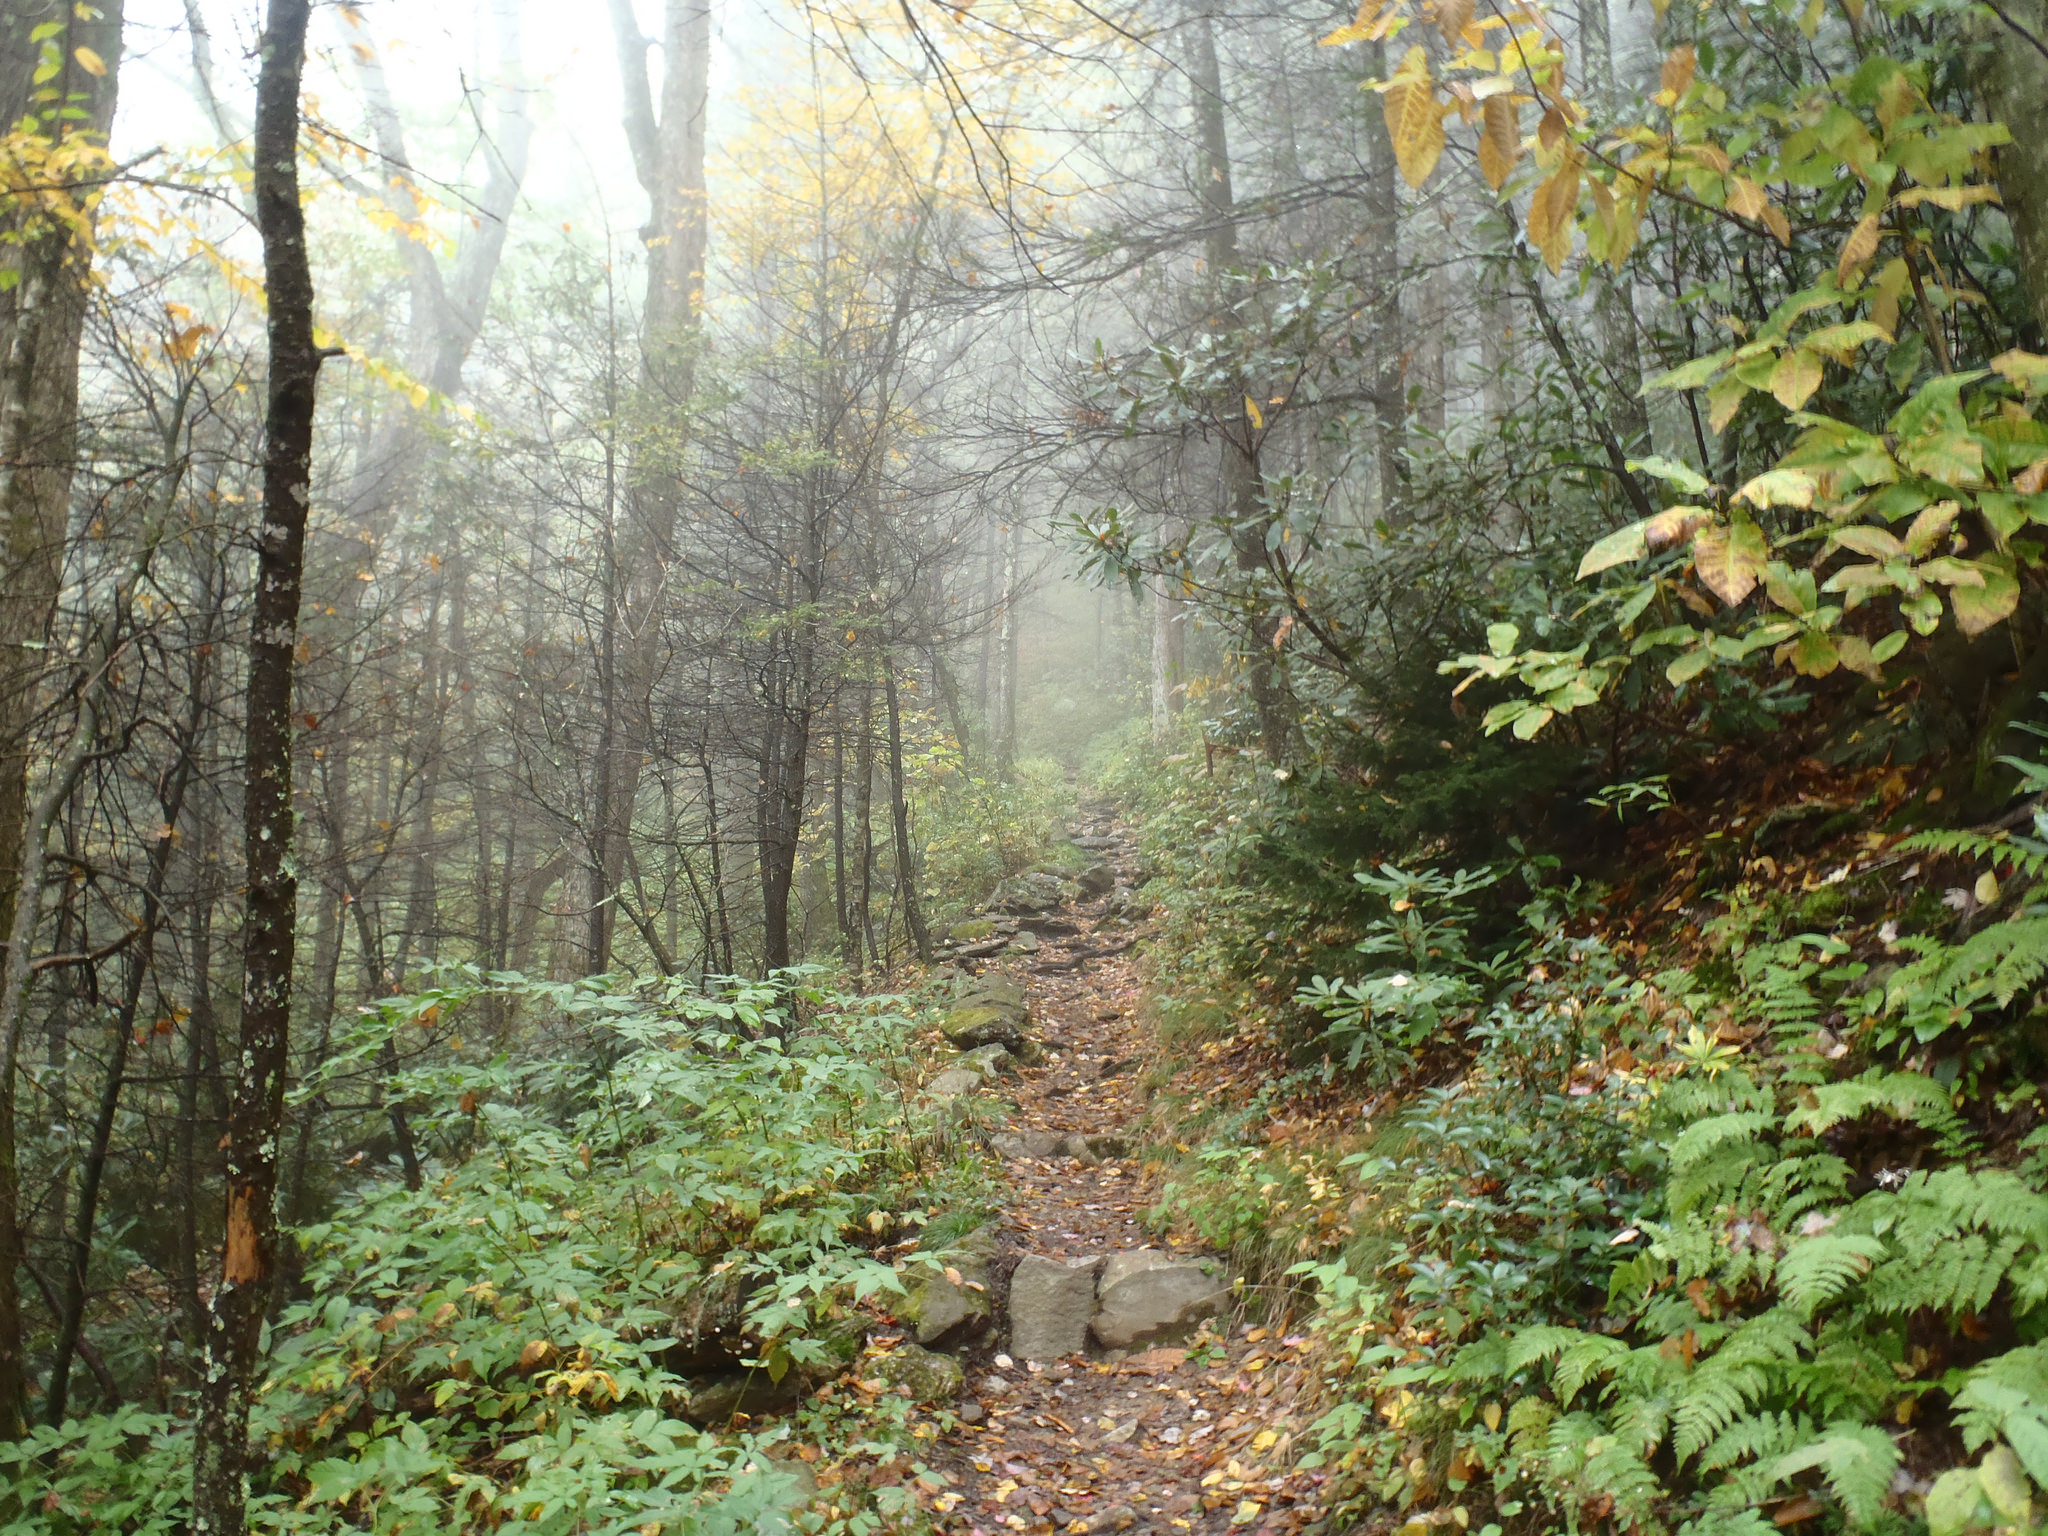 Great Smoky Mountains National Park by maspangler, on Flickr